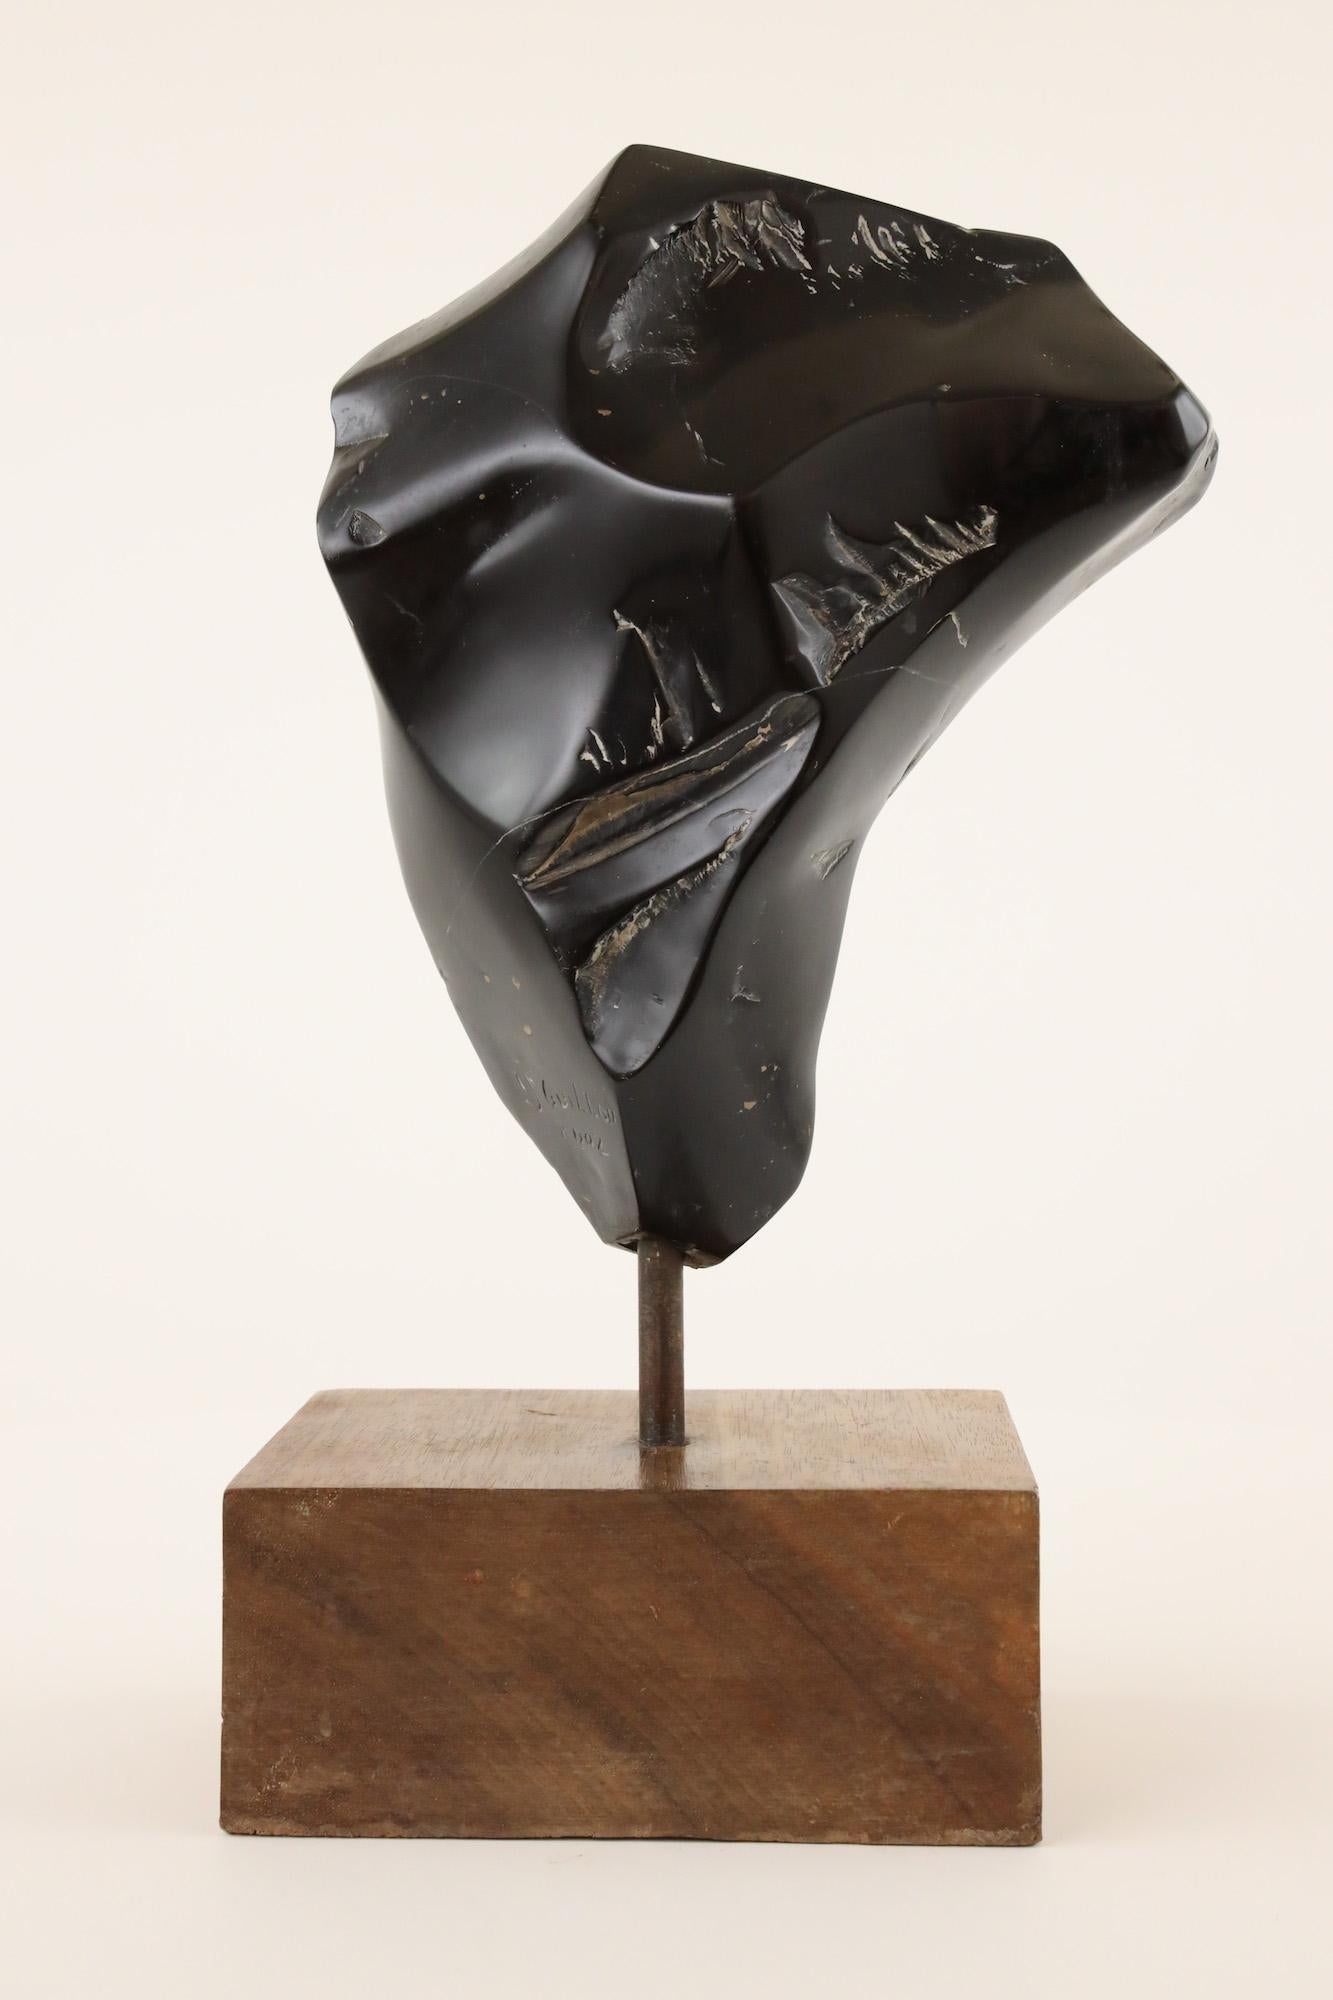 Unique work. Belgian black marble sculpture. Sold with wooden base 
Dimensions of the sculpture: 25 H x 21 L x 9 D cm
Total height of the sculpture with the base and shaft: 37 cm